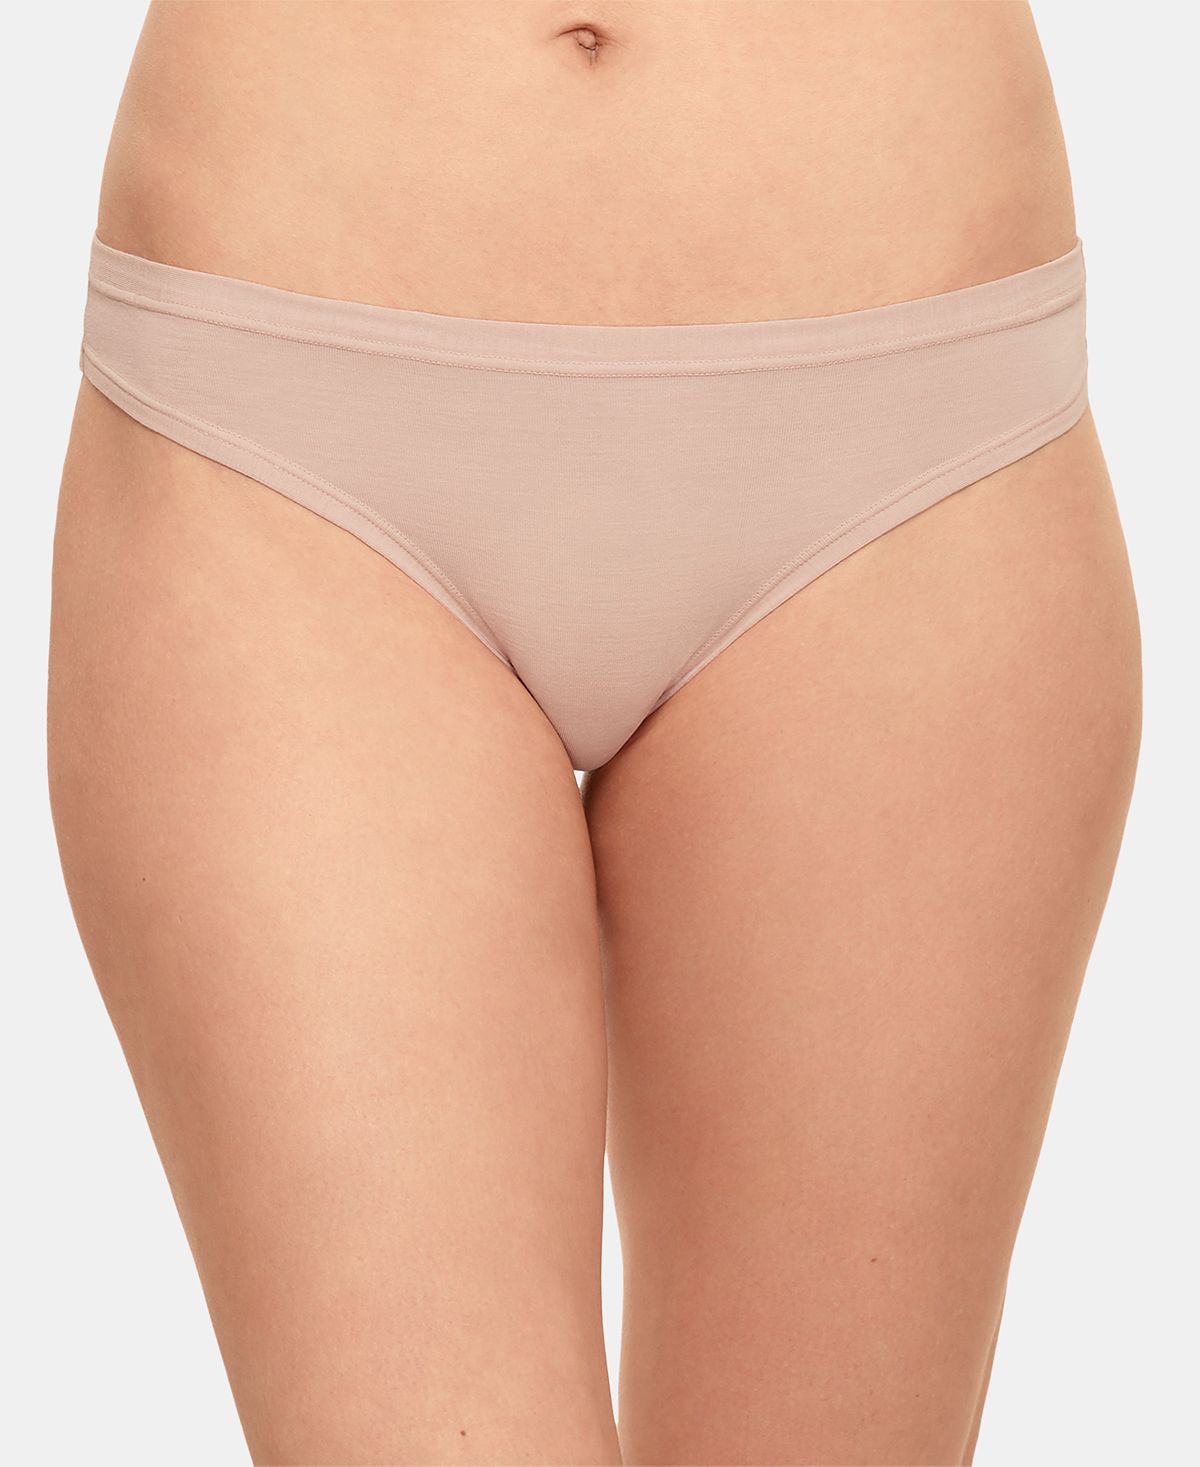 B.tempt'd Wo Future Foundation One Thong Underwear 976289 Rose Smoke (Nude 5)